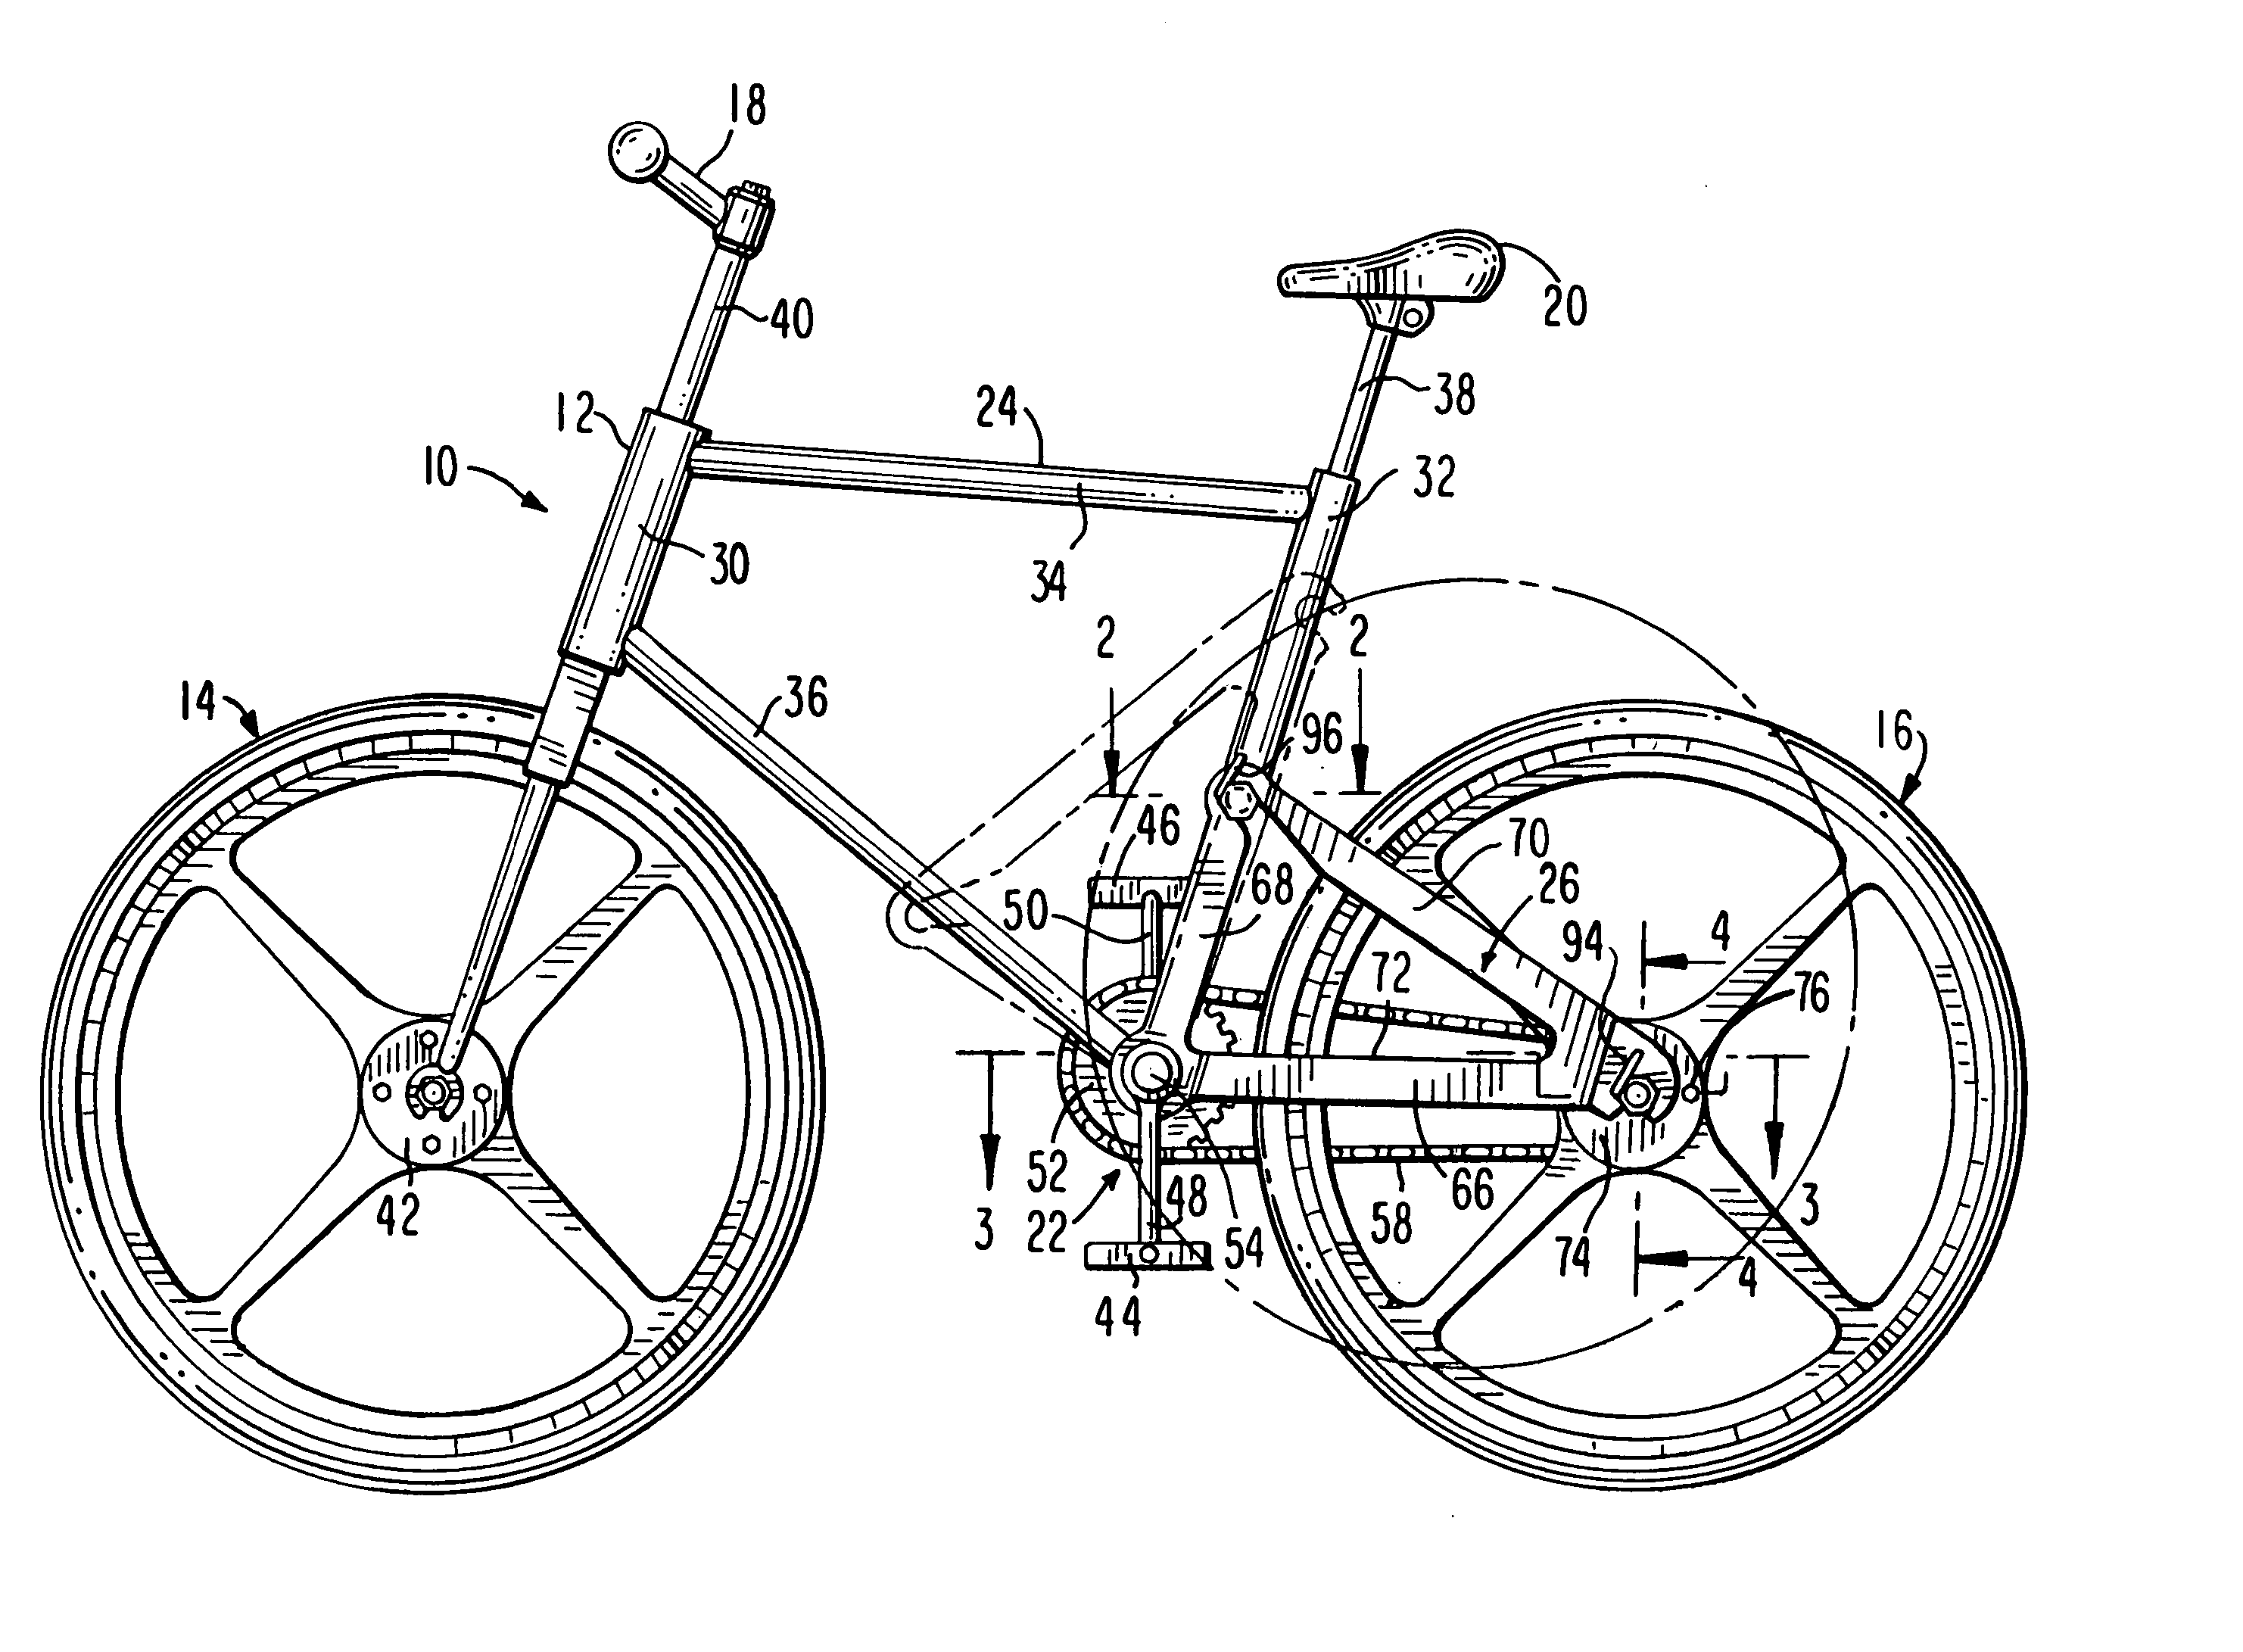 Foldable bicycle frame with axial rear wheel removal